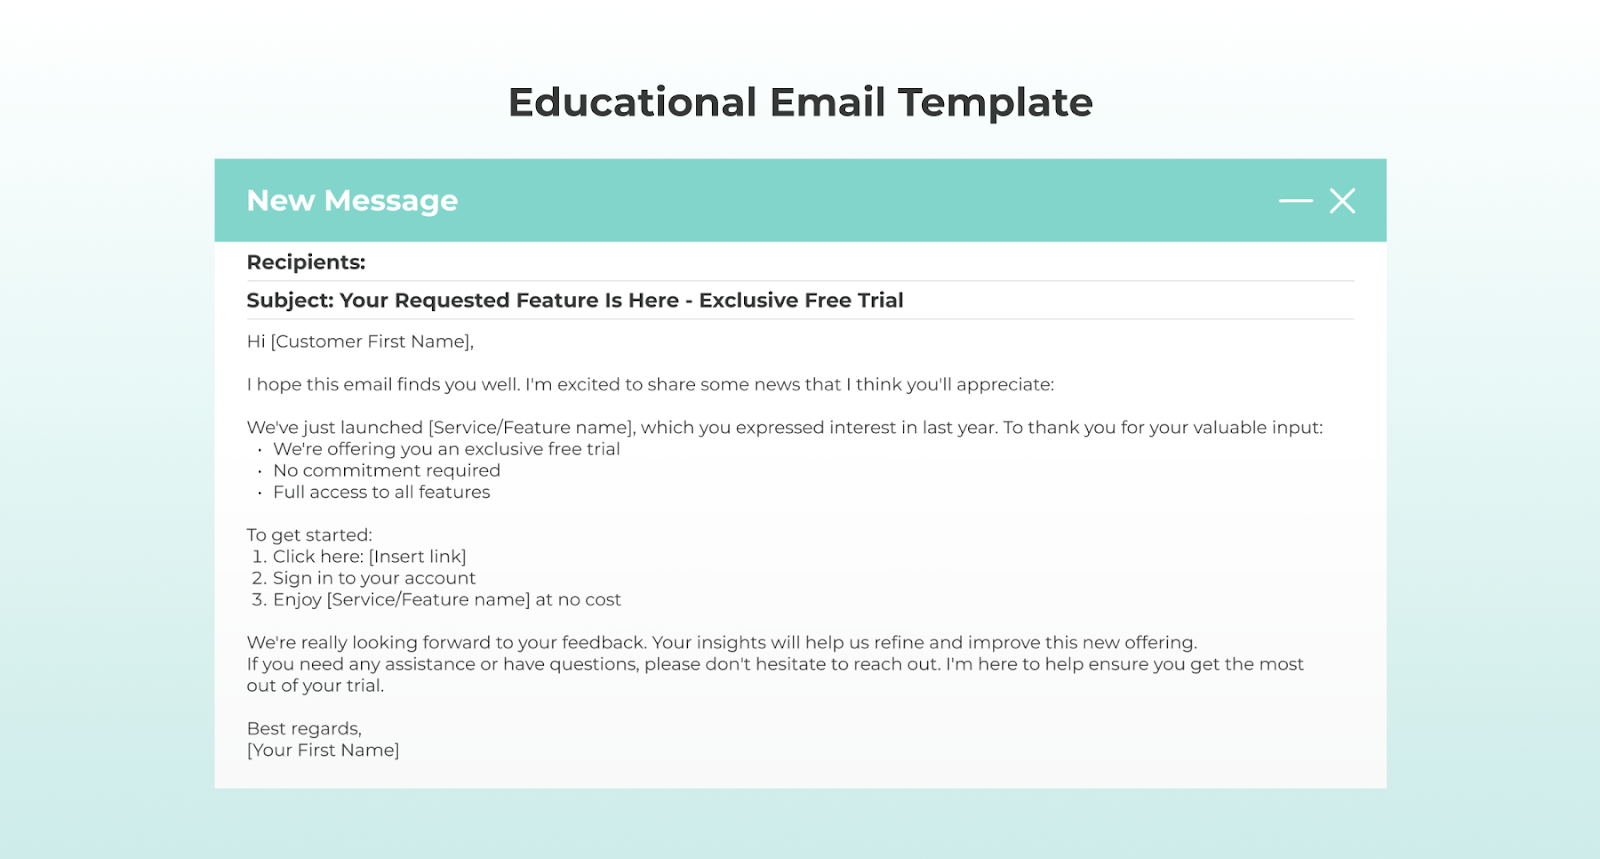 Educational Email Template